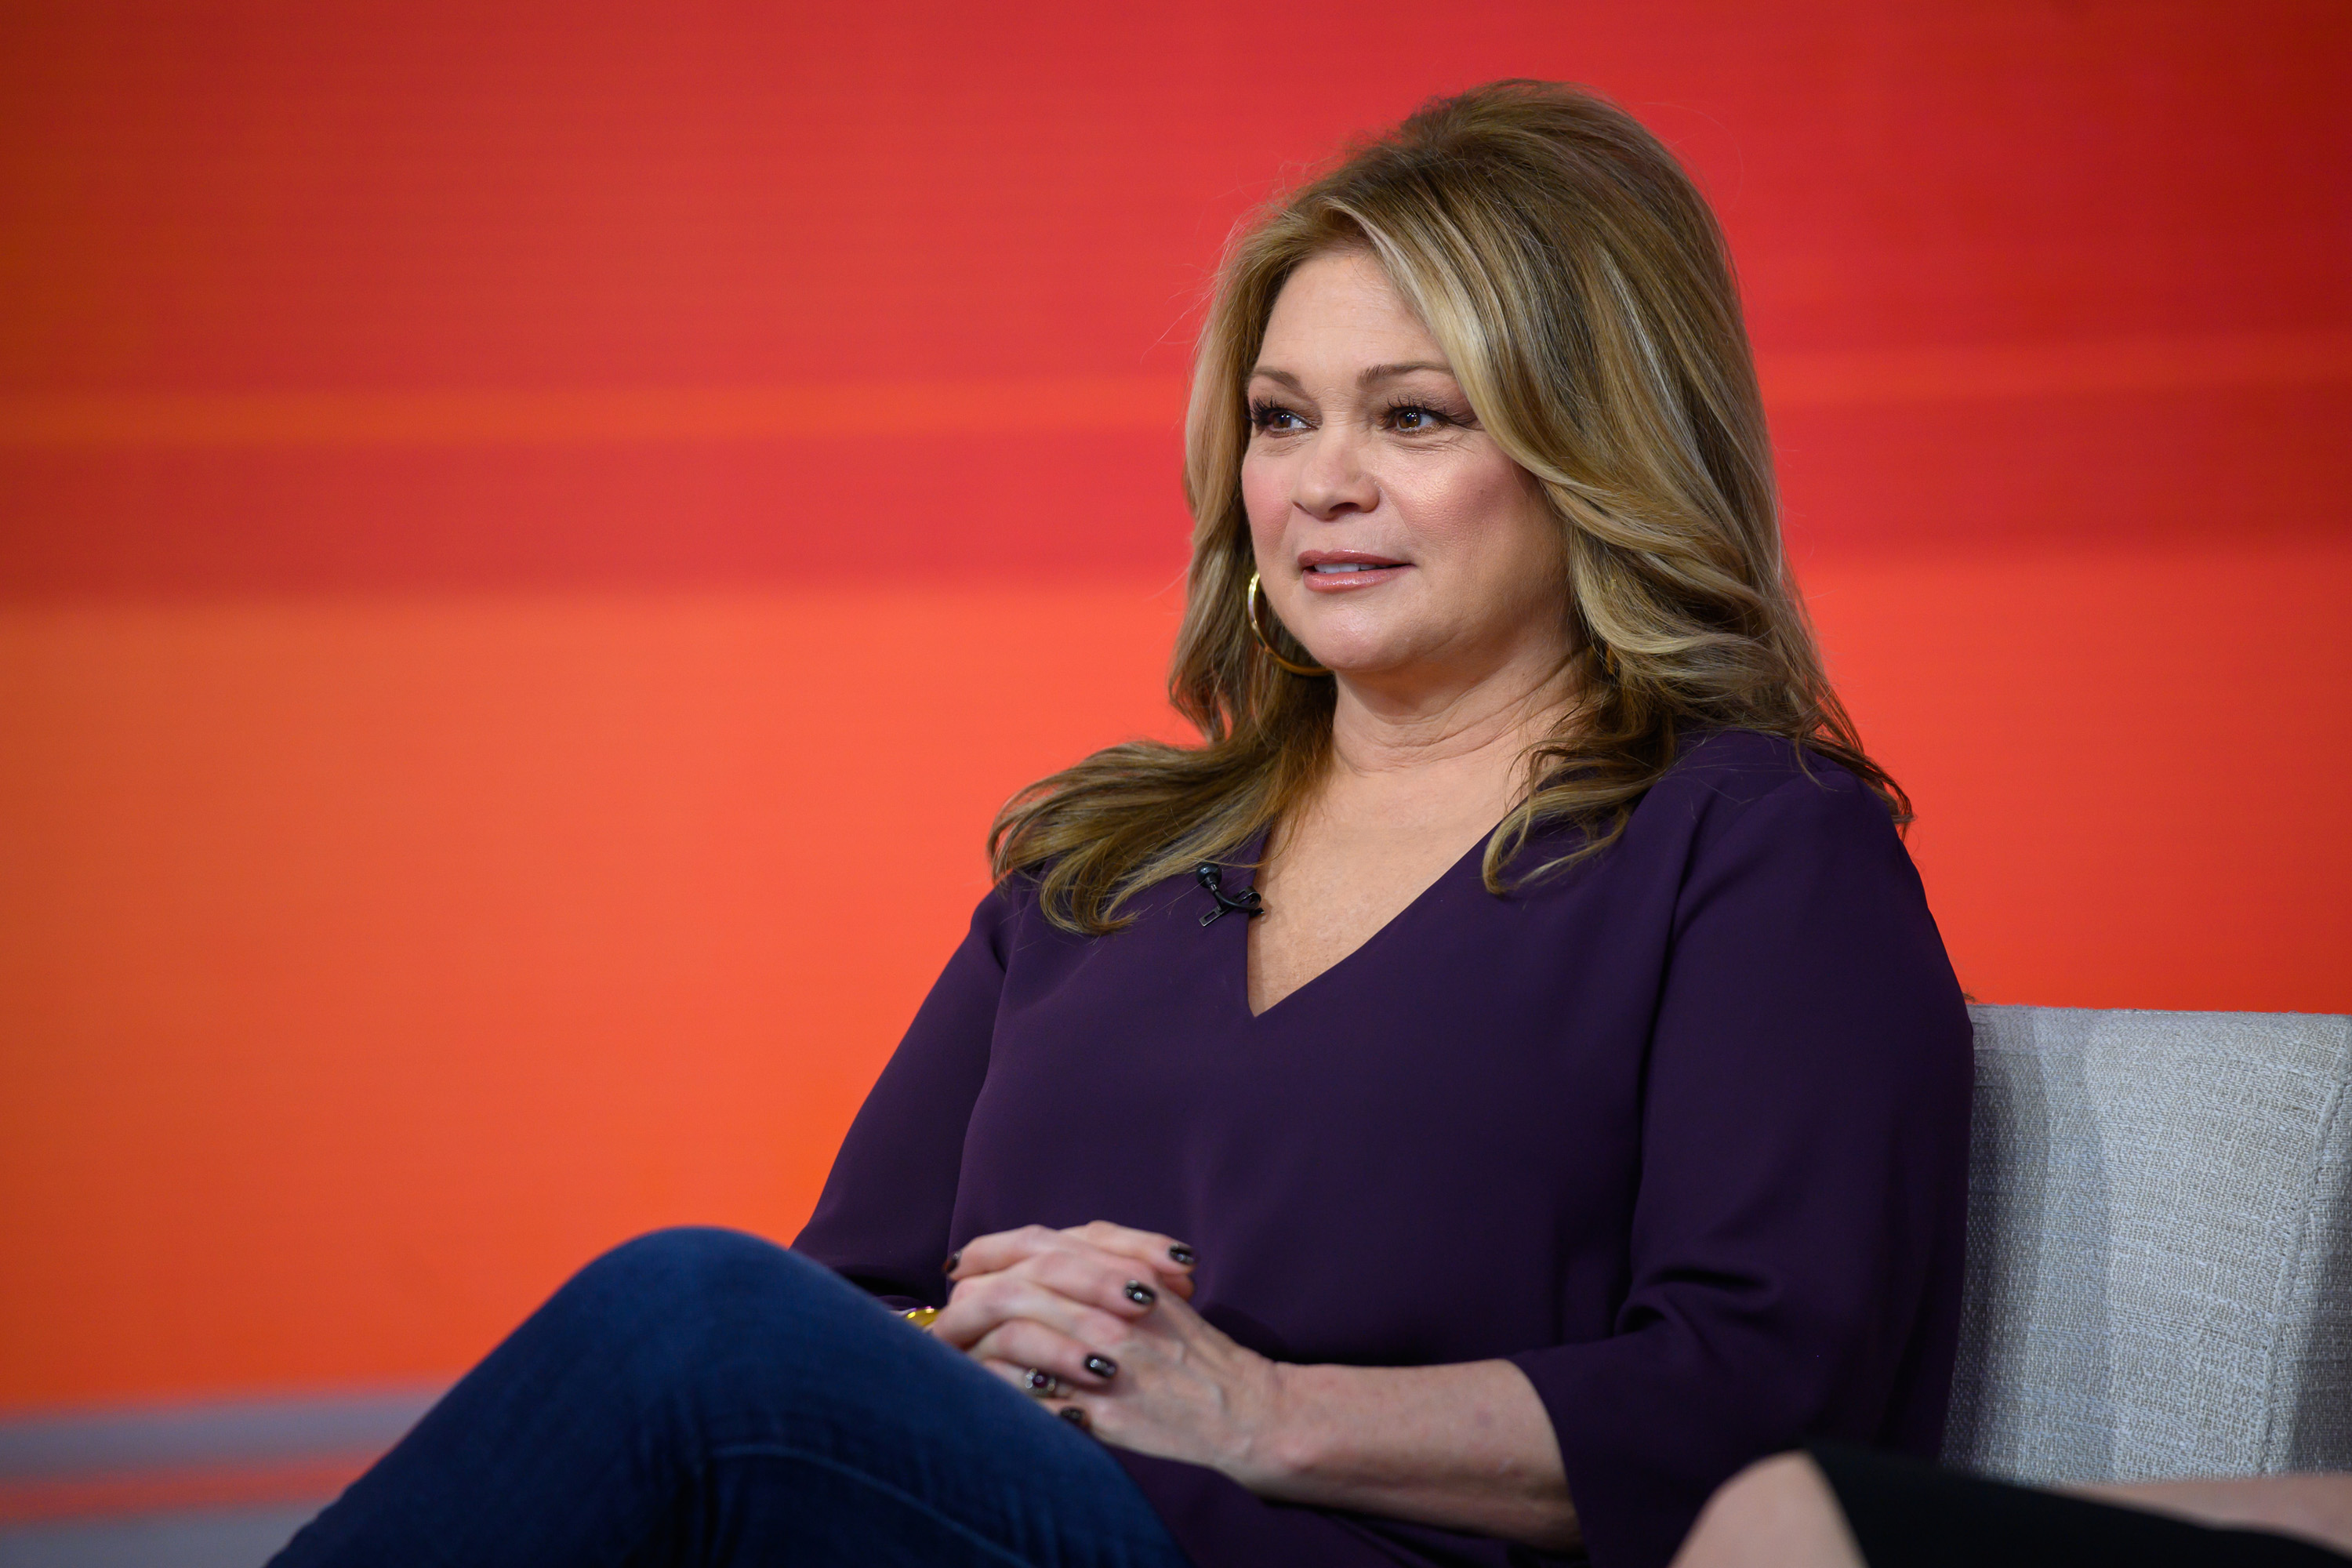 Valerie Bertinelli sitting down during an interview on the 'Today' show